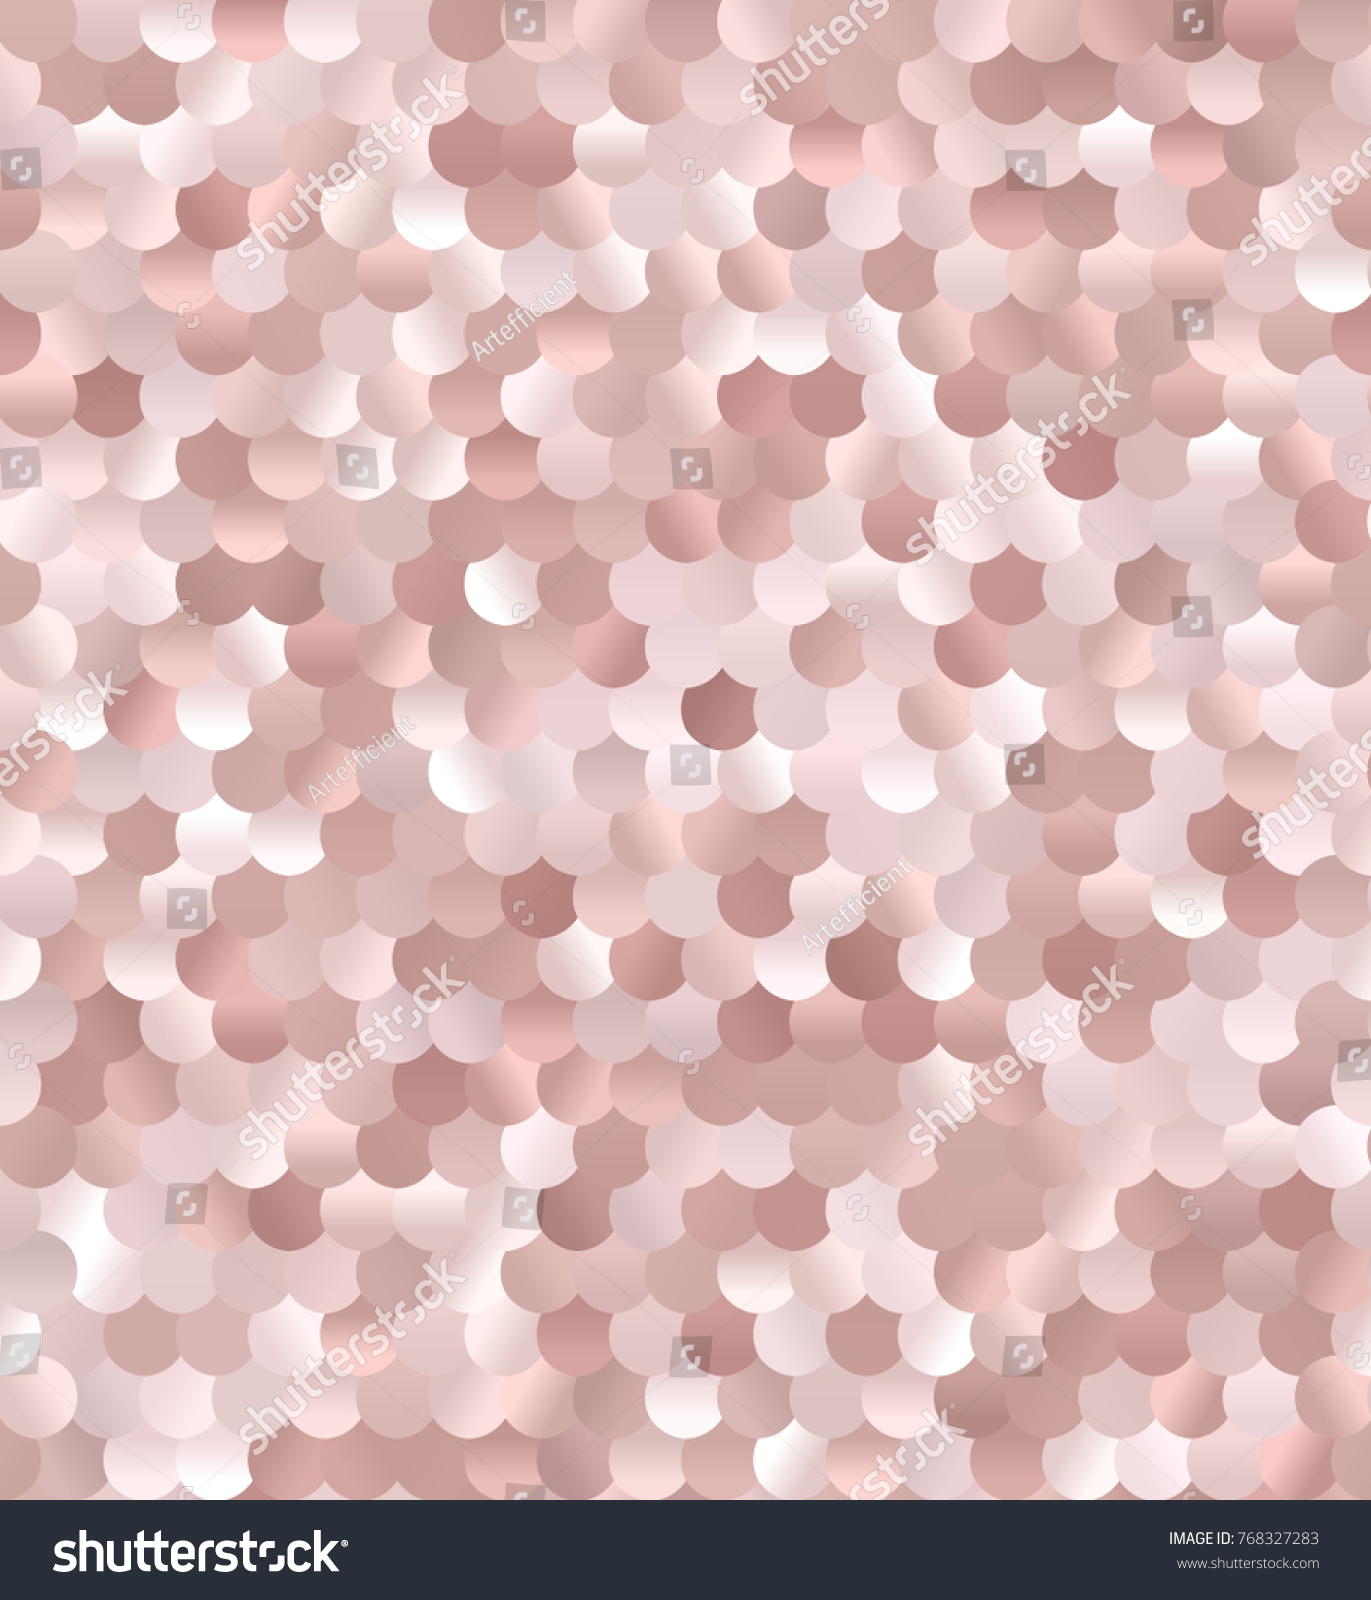 SVG of Rose Gold Sequin Scales Seamless Vector Pattern. Pastel Pink Glitter Texture. Shiny Reflective Spangles Bead Background. Pattern Tile Swatch Included. svg